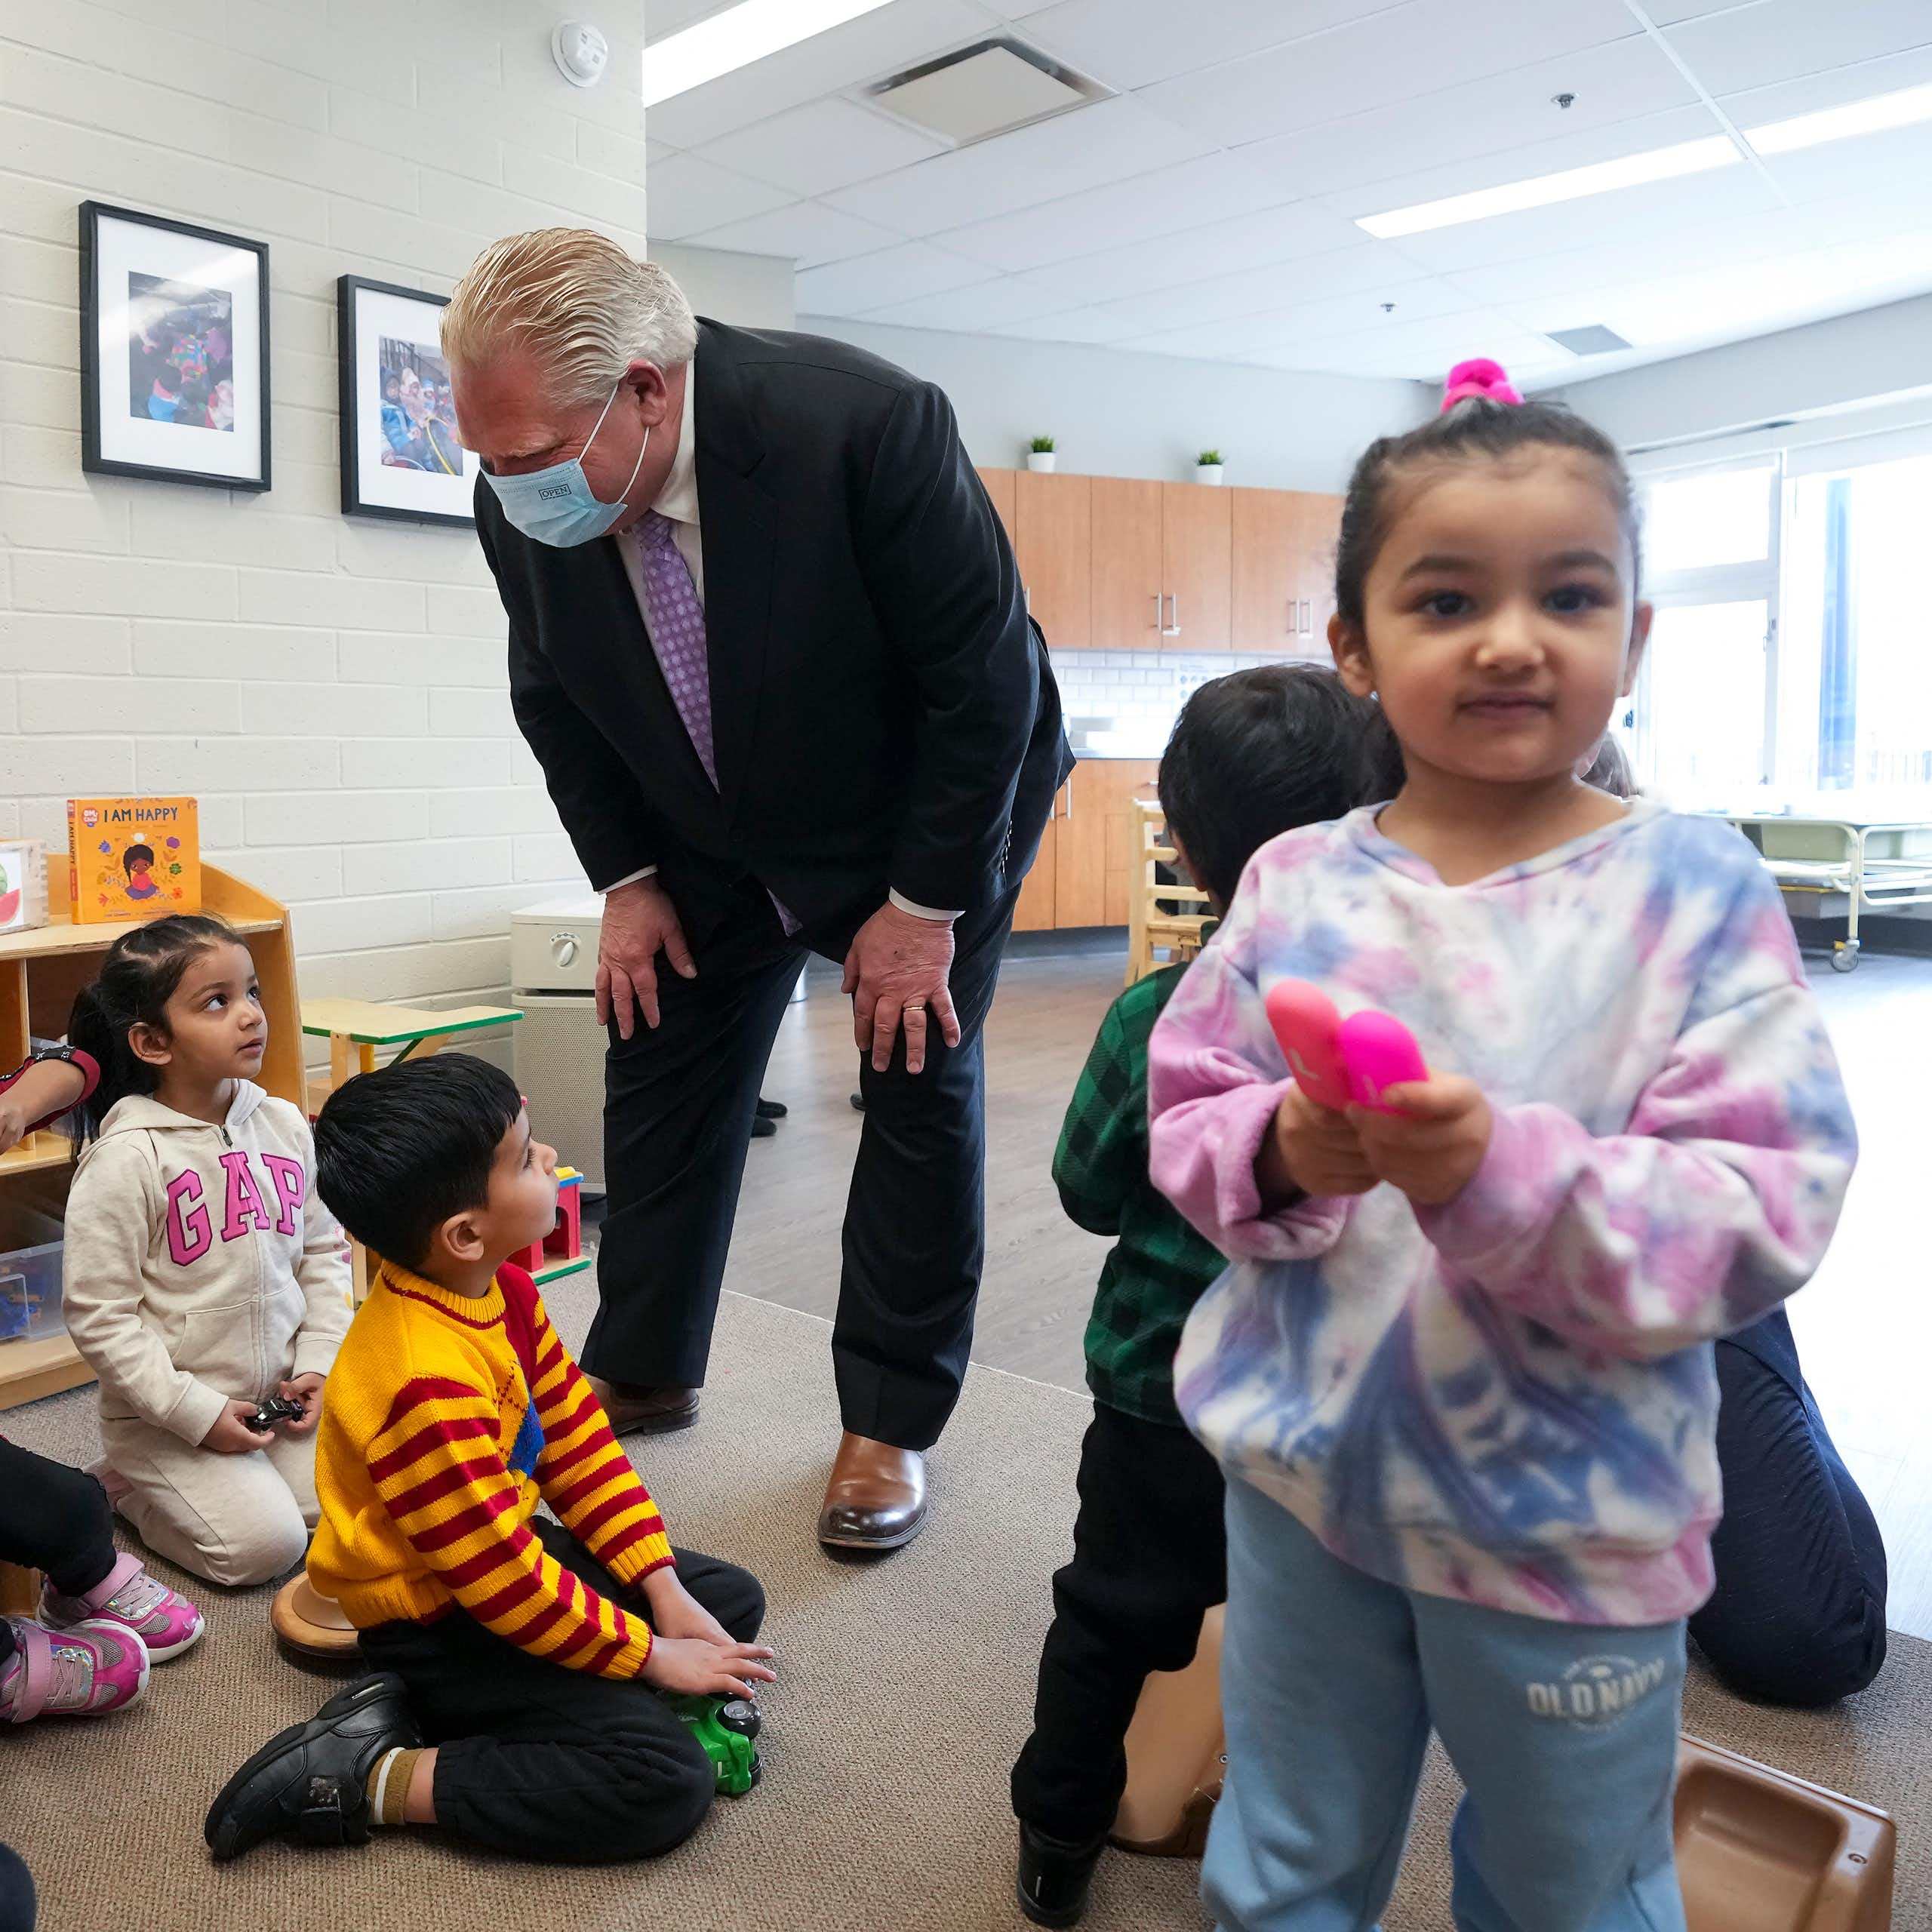 A man in suit and face mask seen bending over talking with children as a child holds a pink object in the foreground.